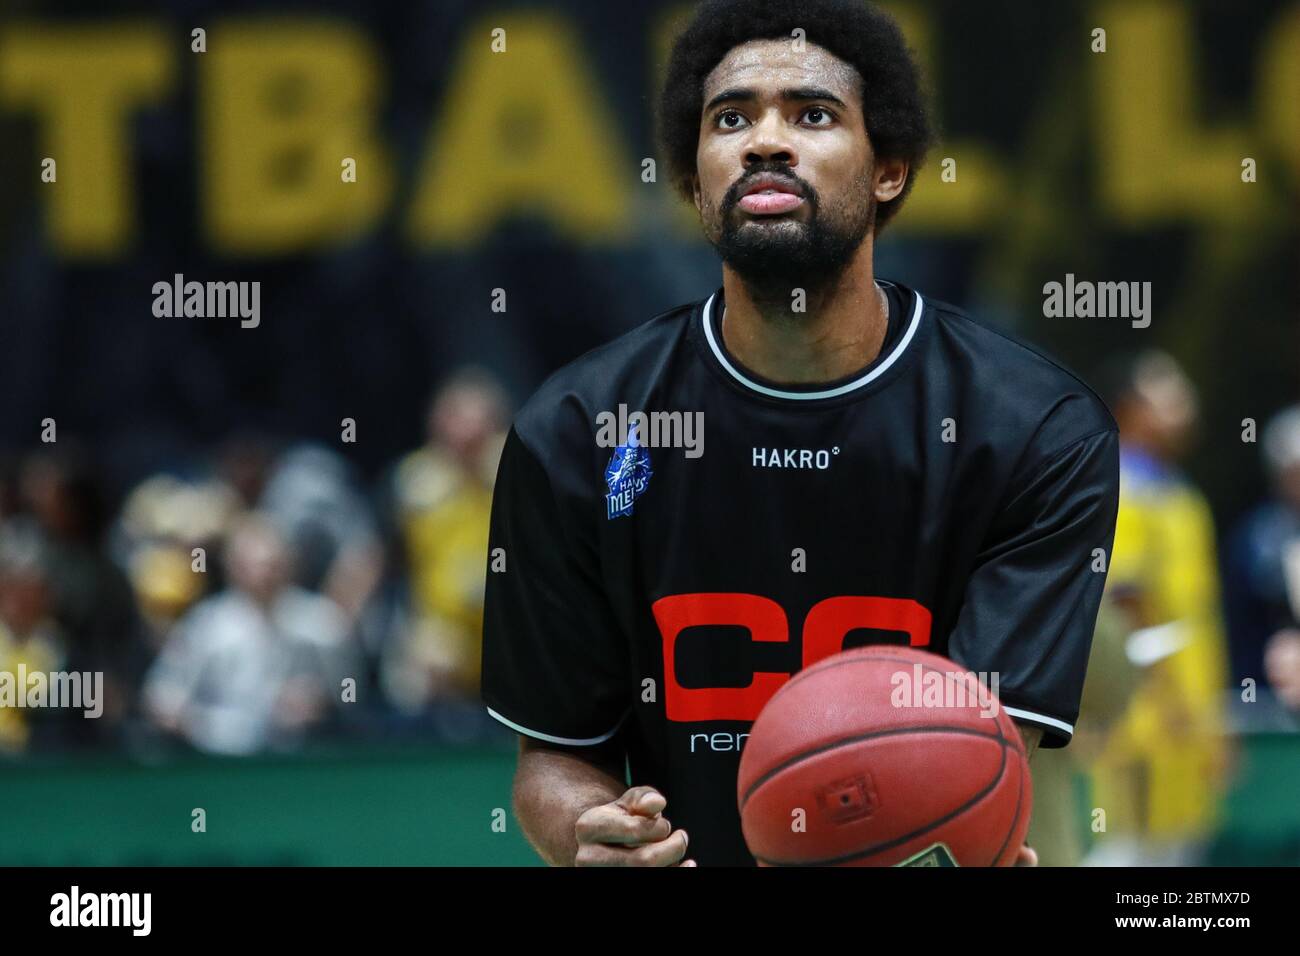 Braunschweig, Germany, December 27, 2019:Aaron Jones of Merlins Crailsheim in action during the warmup session before the Basketball BBL Bundesliga Stock Photo